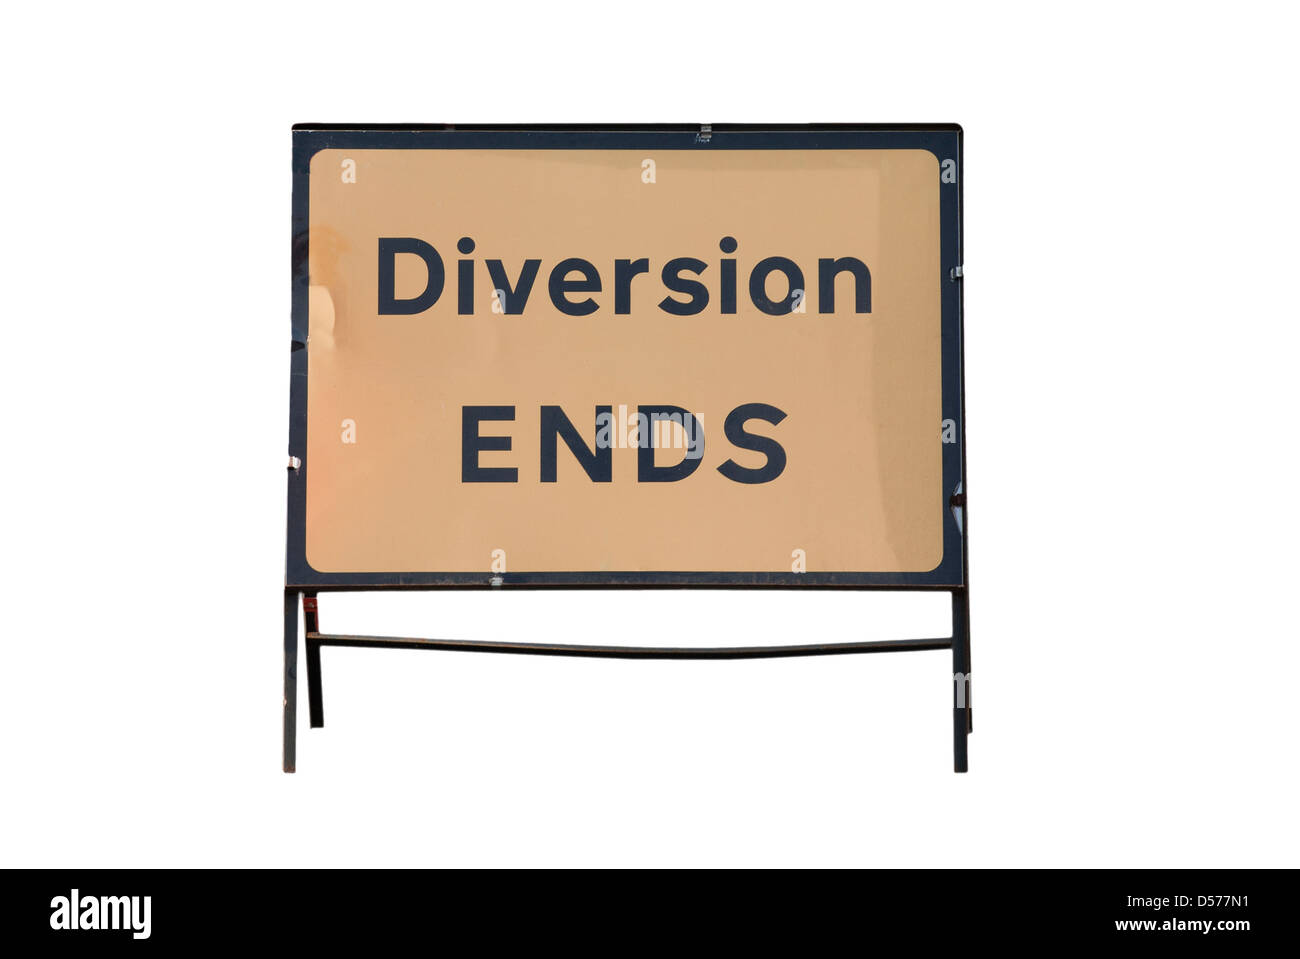 UK Road Traffic Diversion Ends Signs And Barriers Stock Photo